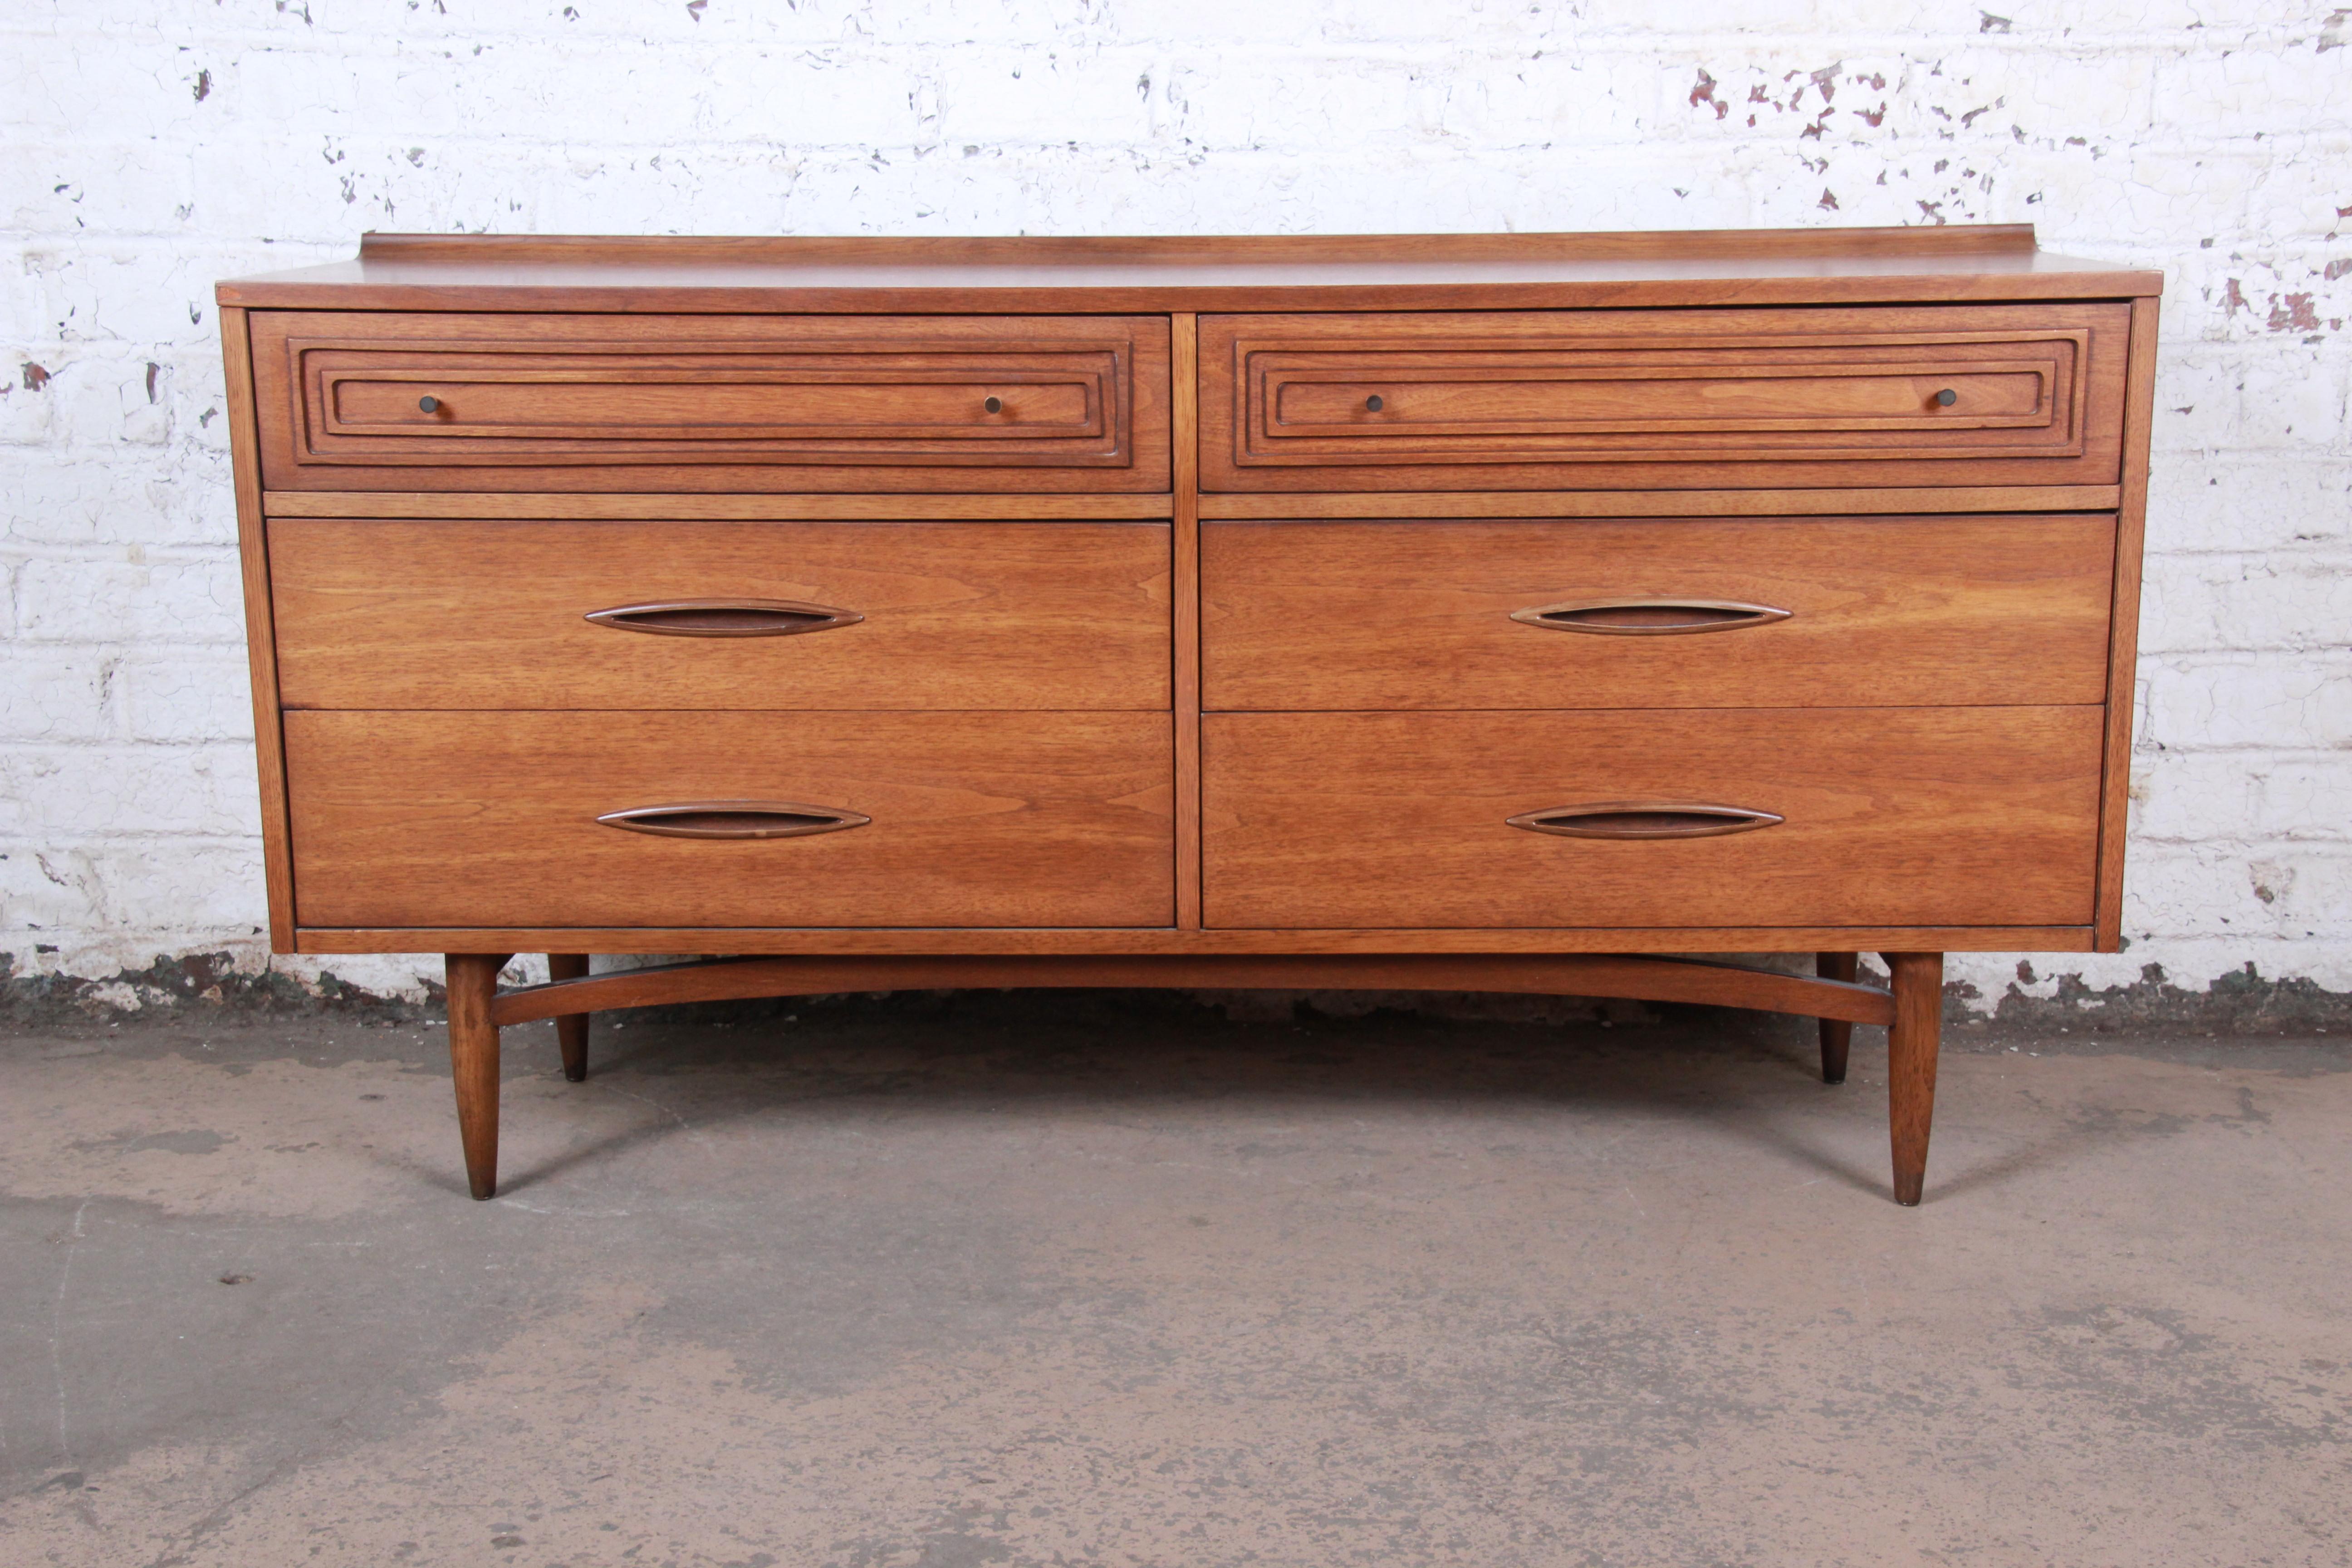 A sleek and stylish Mid-Century Modern walnut double dresser or credenza

From the Sculptra line by Broyhill Premier

USA, 1960s

Sculpted walnut and brass hardware

Measures: 60